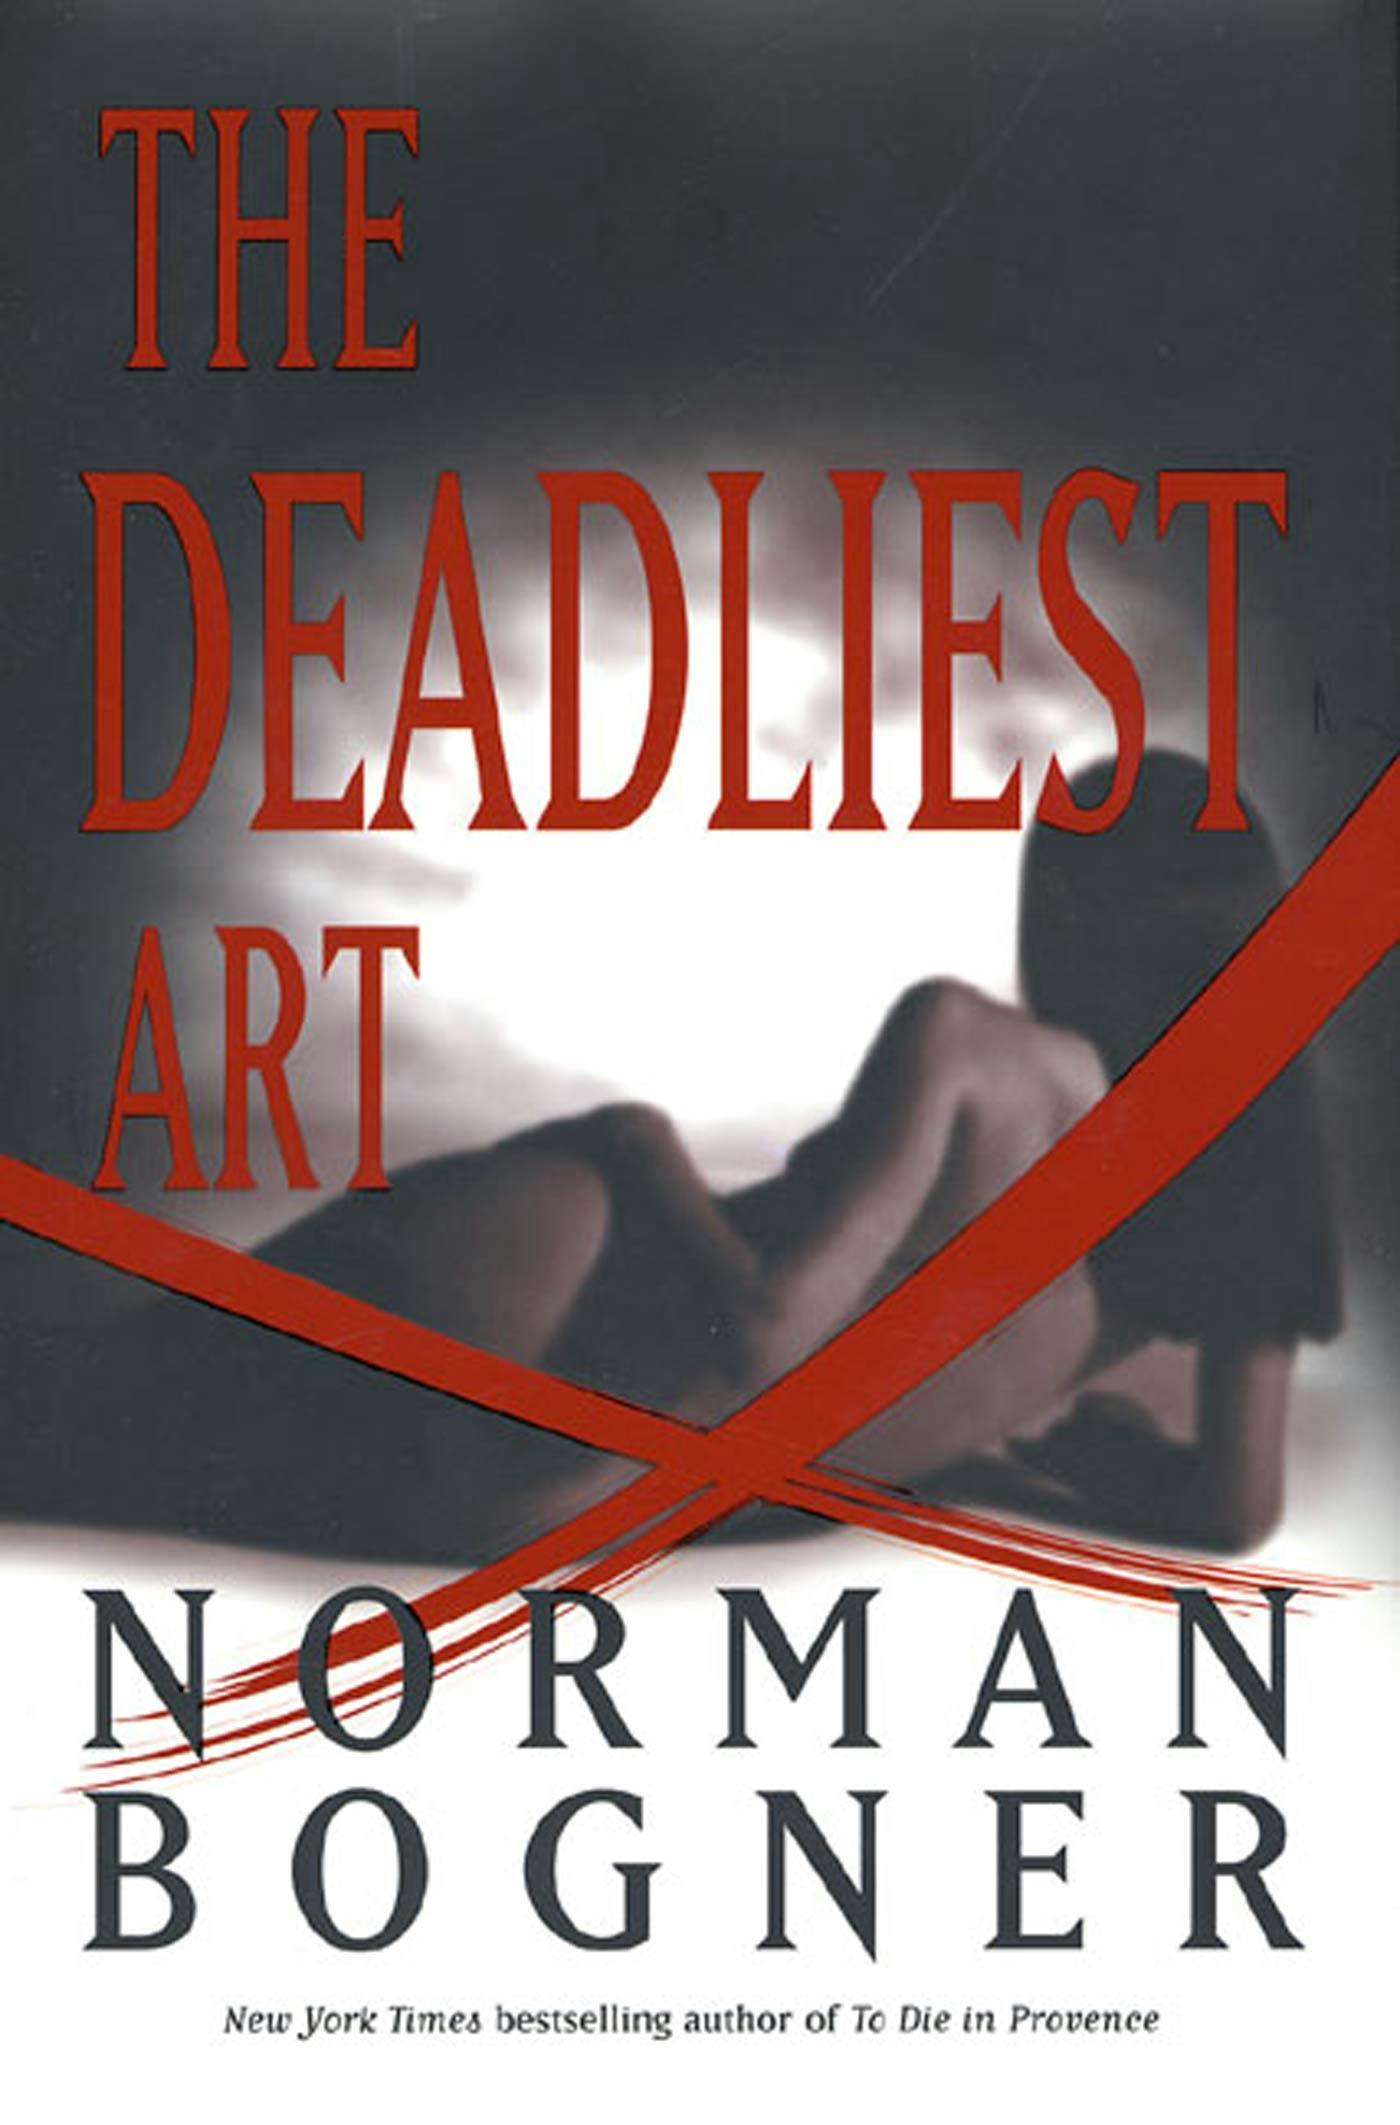 Cover for the book titled as: The Deadliest Art